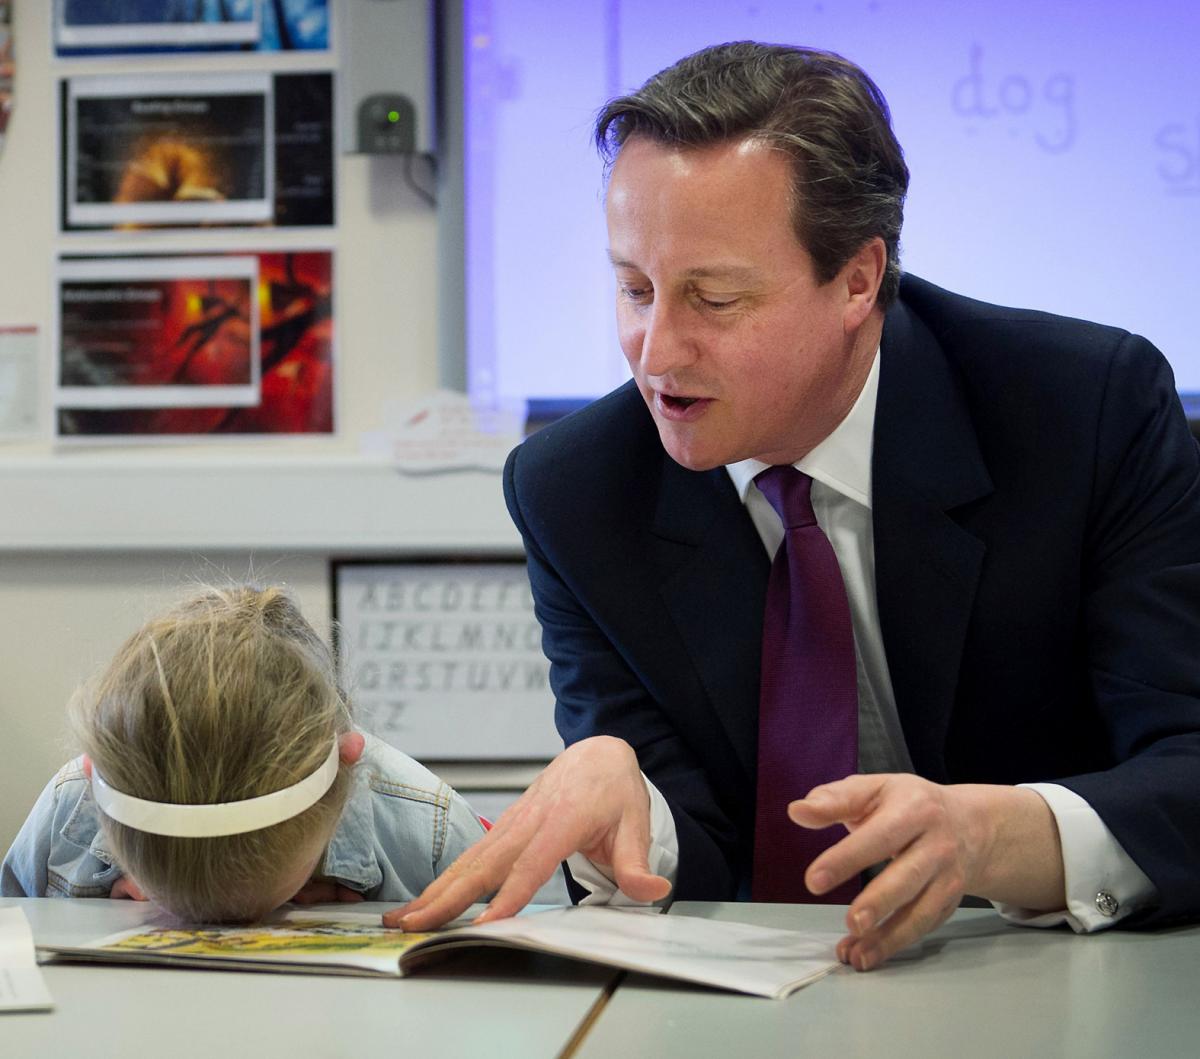 David Cameron Reads To This 6 Year Old And She Puts Her Head On